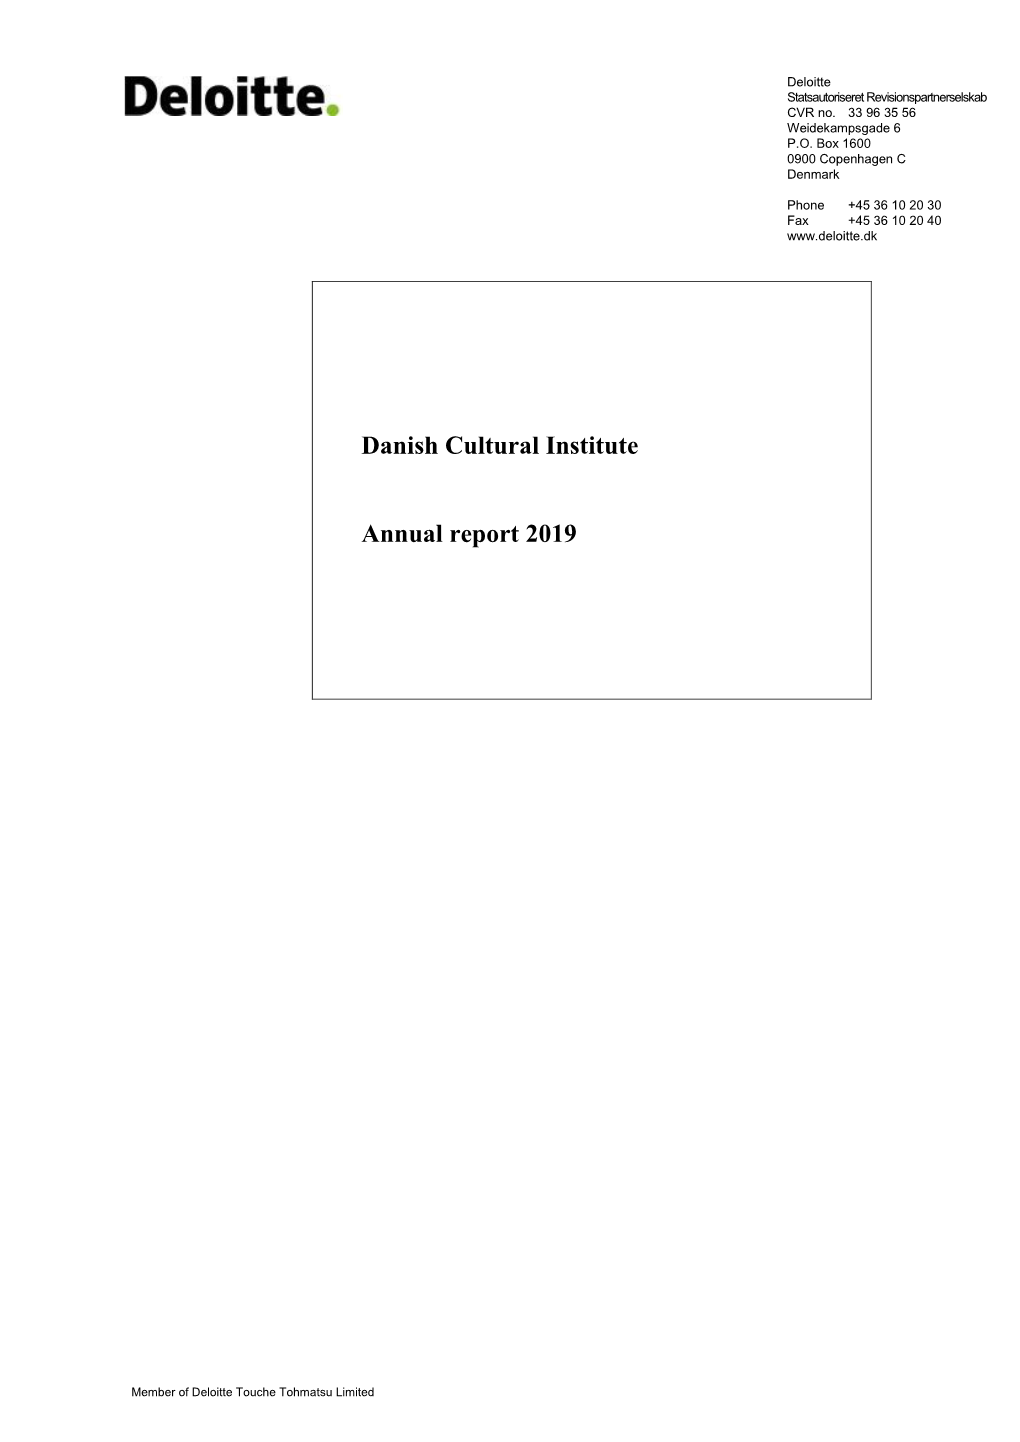 Download DCI's Annual Report 2019